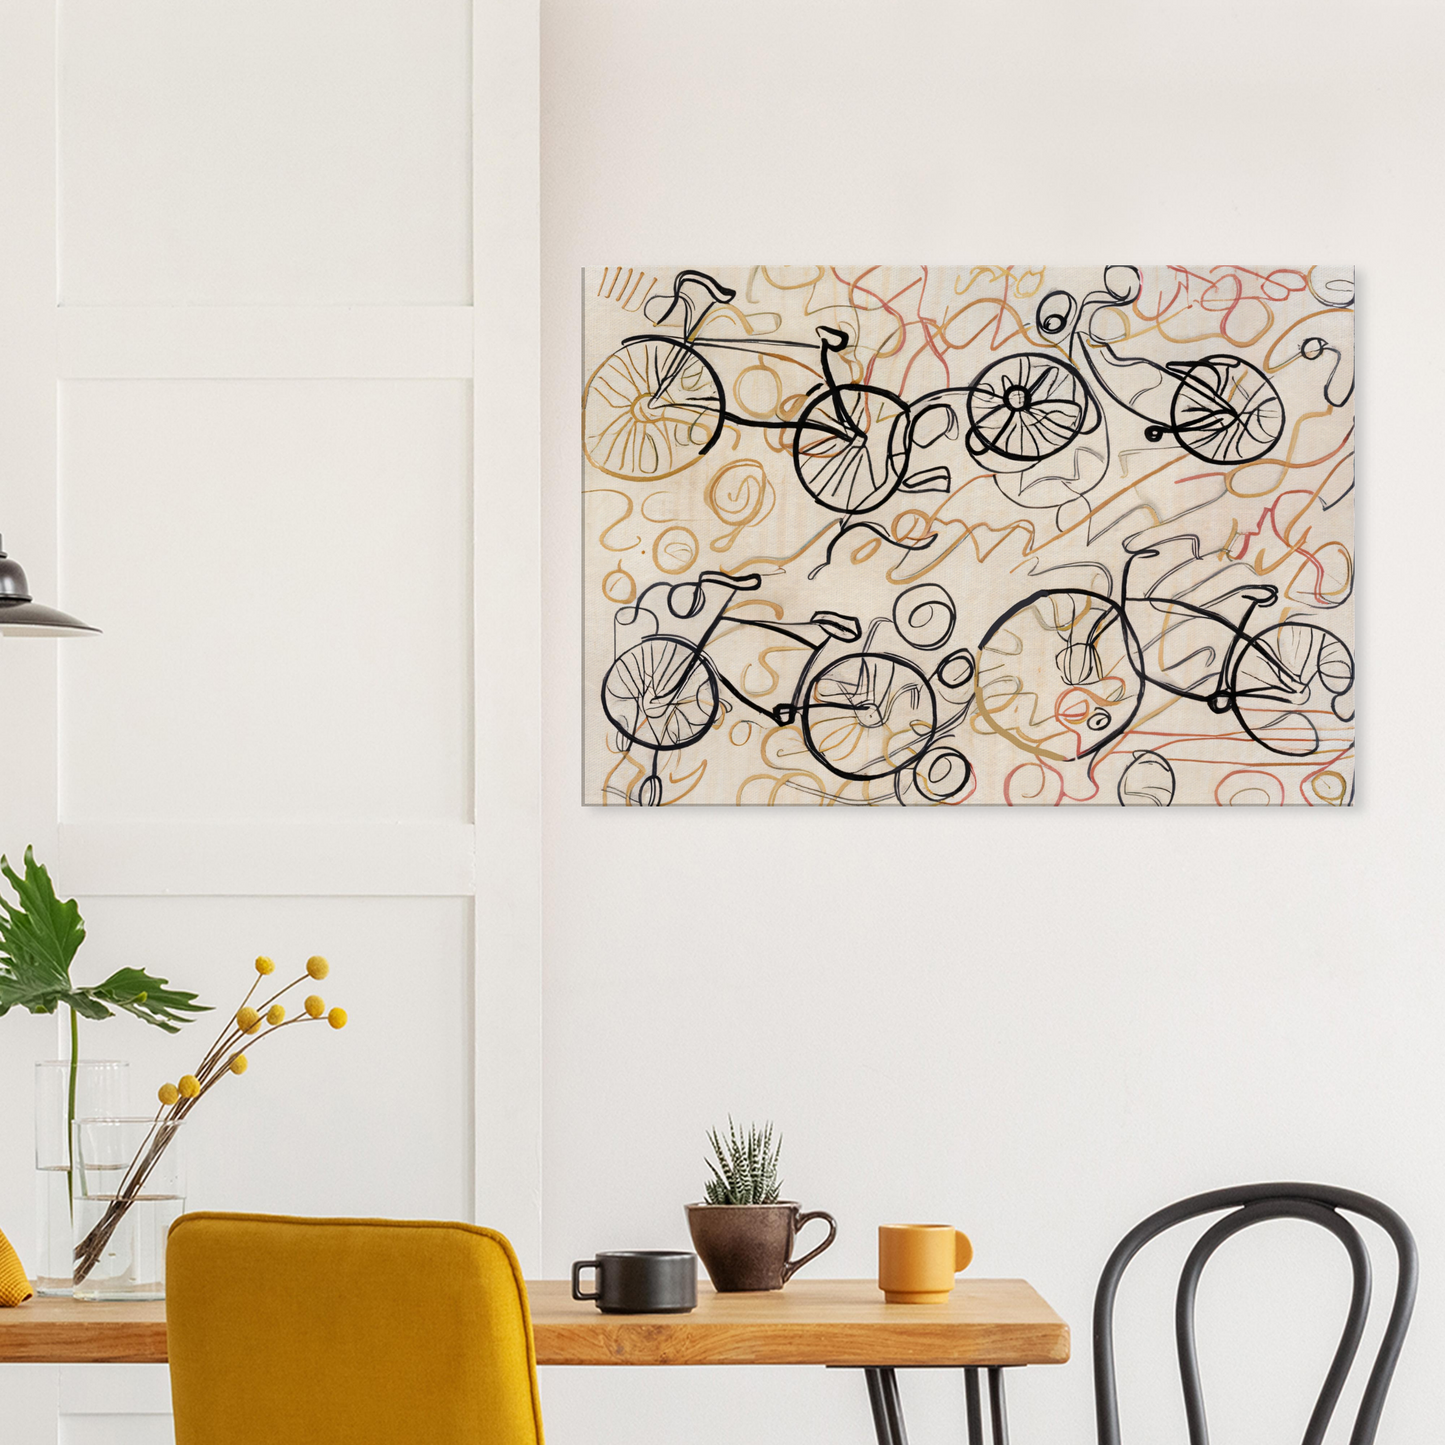 Canvas with bicycle line pattern by Posterify Design